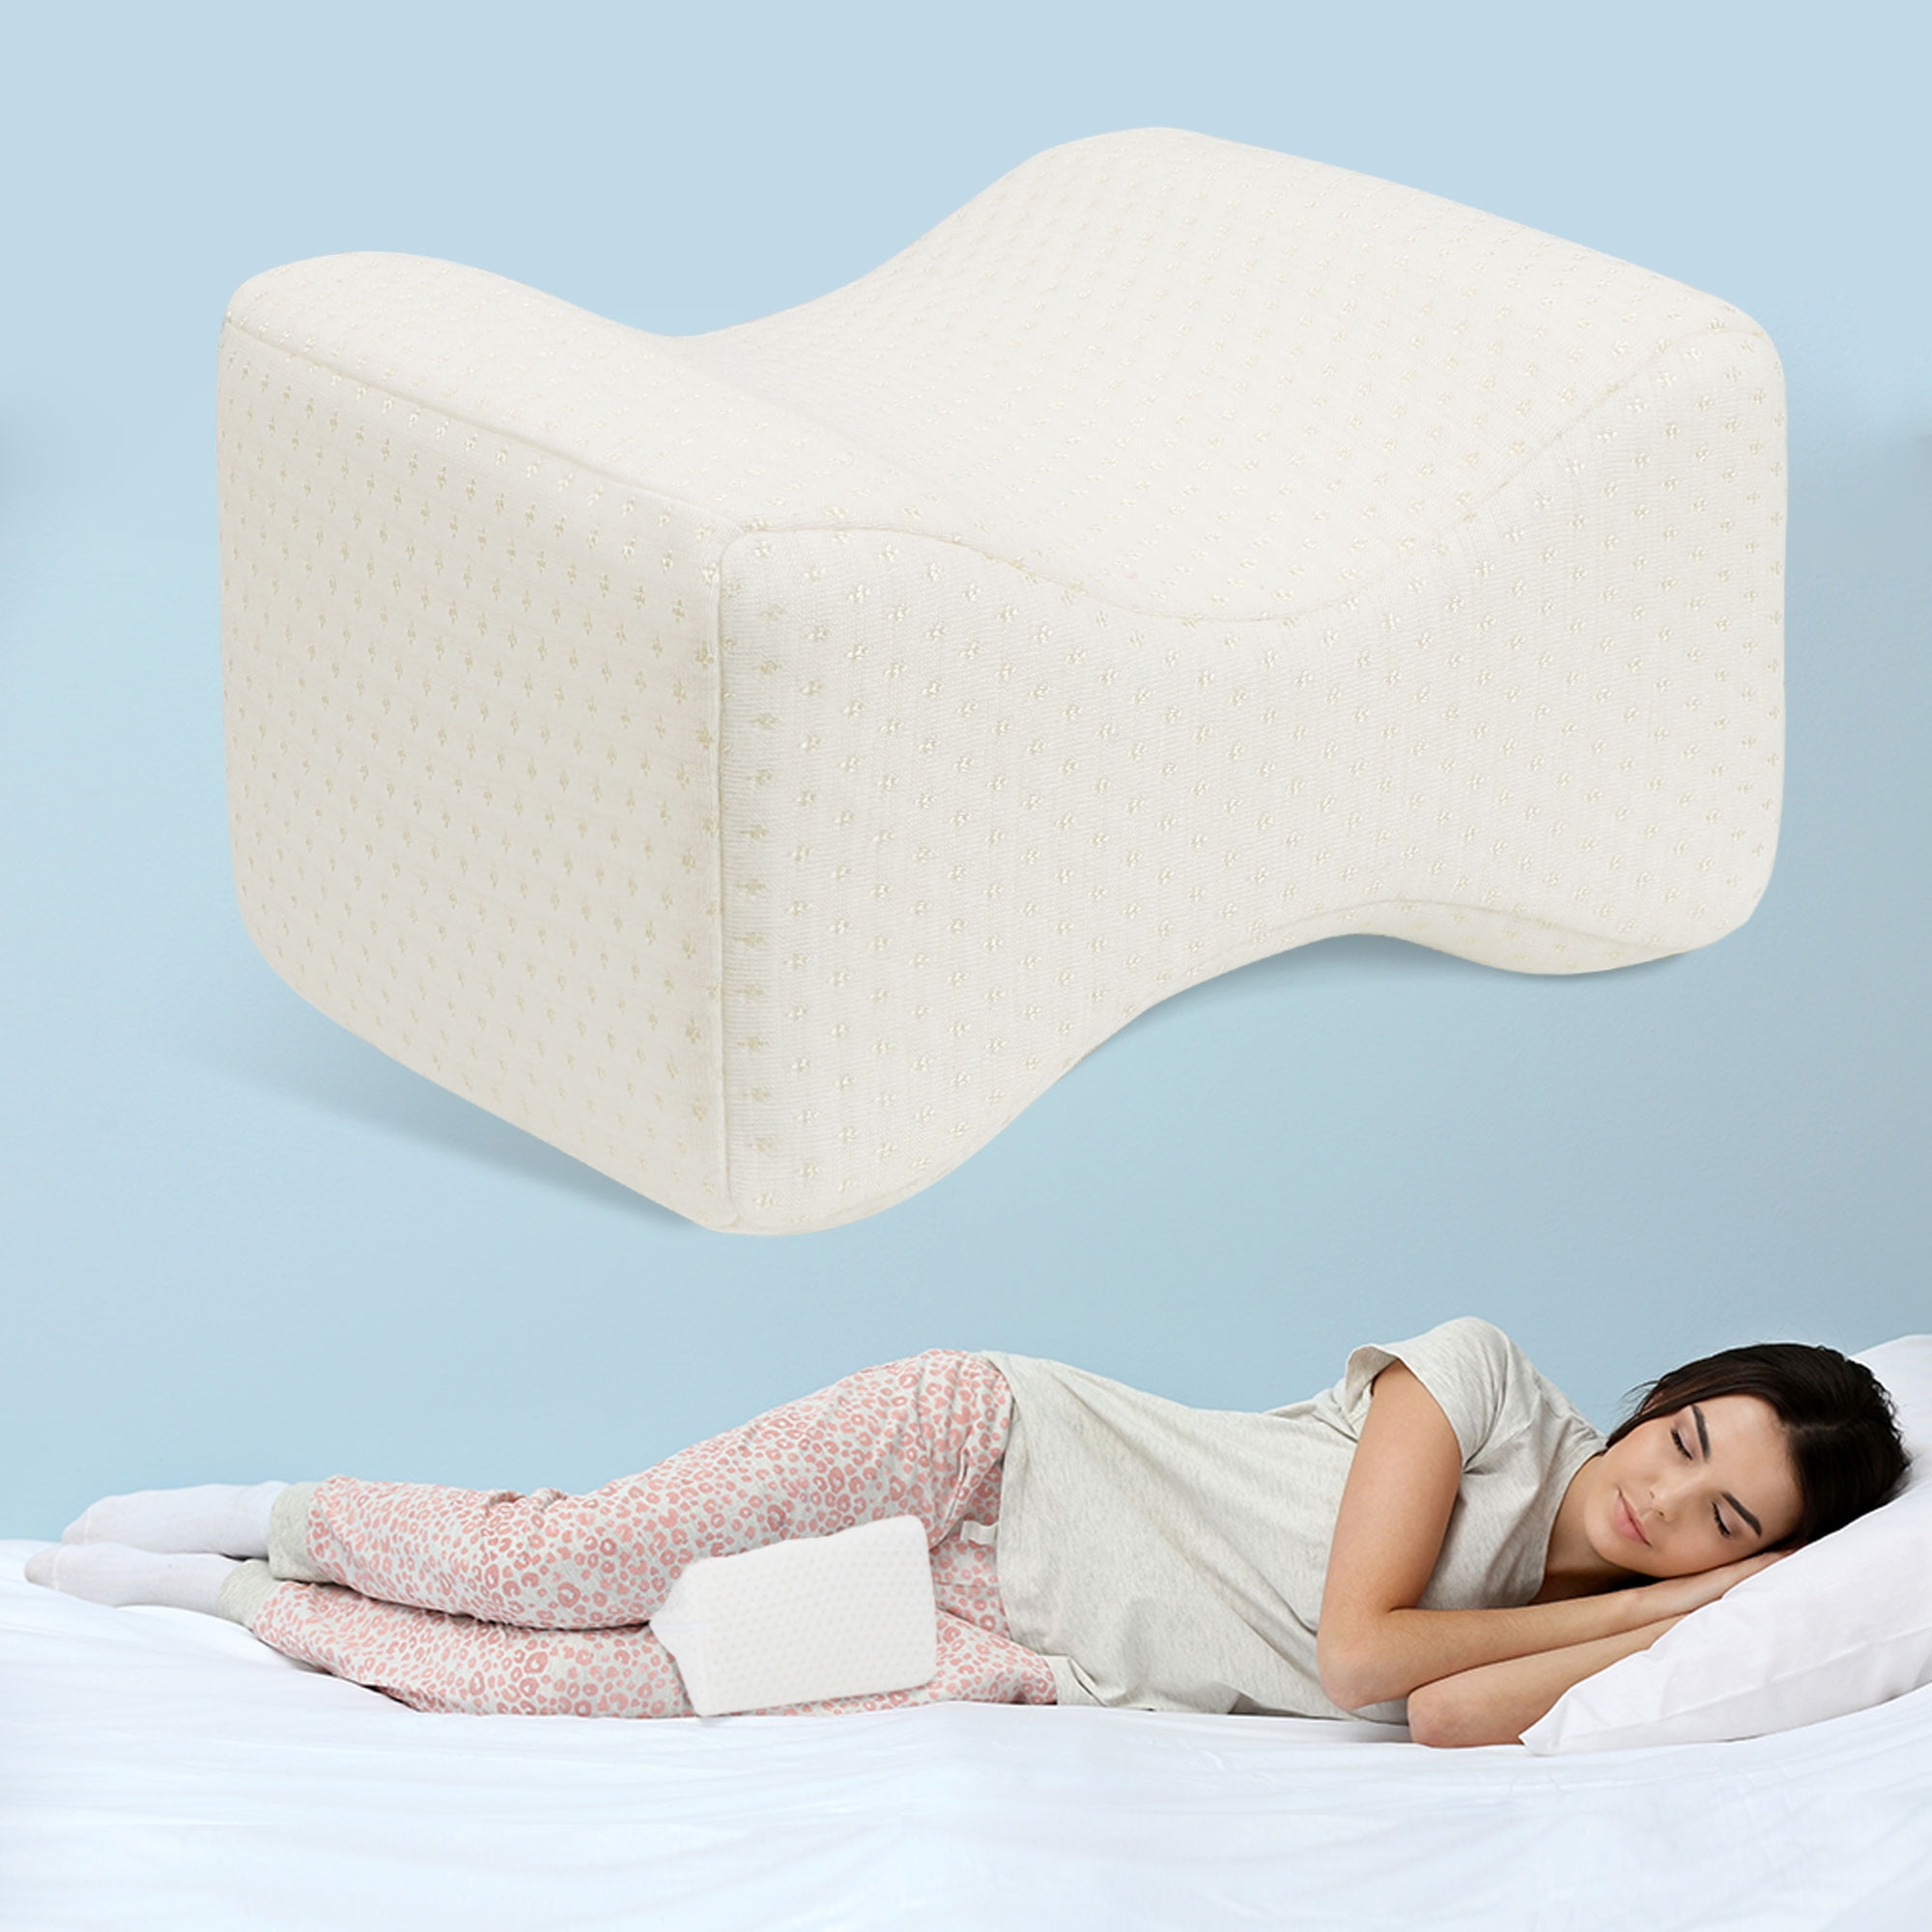 Buy Knee Pillow for Side Sleepers with Elastic Strap, Memory Foam